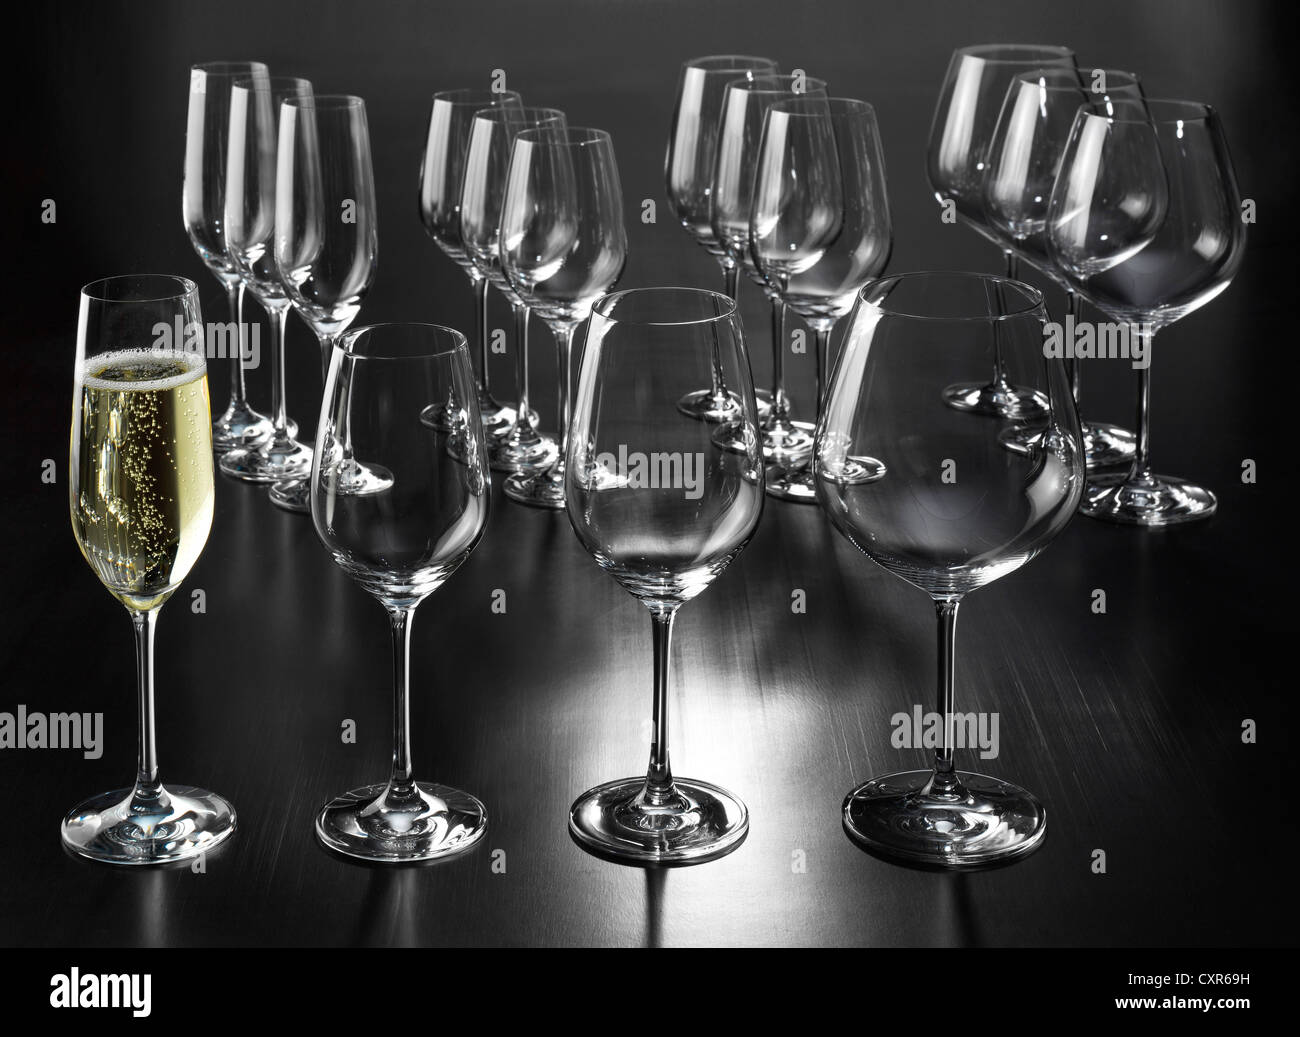 https://c8.alamy.com/comp/CXR69H/various-empty-glasses-one-glass-filled-with-champagne-CXR69H.jpg